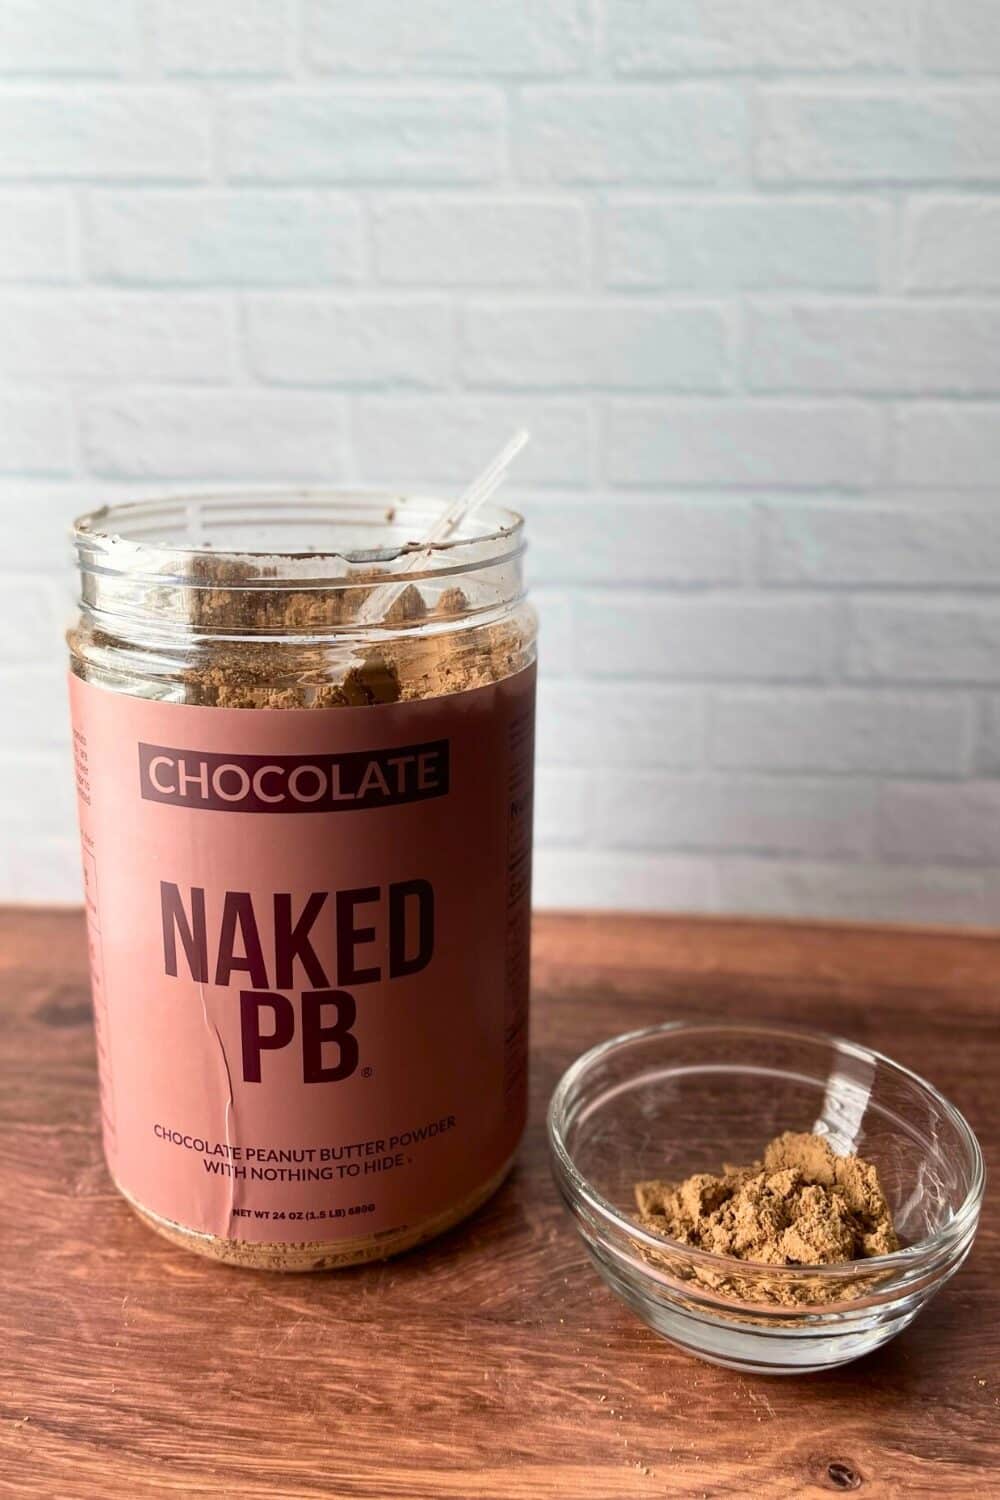 Revealing its contents, the Naked Nutrition Chocolate Powdered Peanut Butter container stands open, its lid resting beside it. A sturdy scoop rests atop the rich cocoa-infused peanut powder, inviting culinary creativity. Nearby, a petite glass container holds an additional scoop, poised for action. The scene unfolds against a backdrop of a clean white surface and a rustic wooden table.